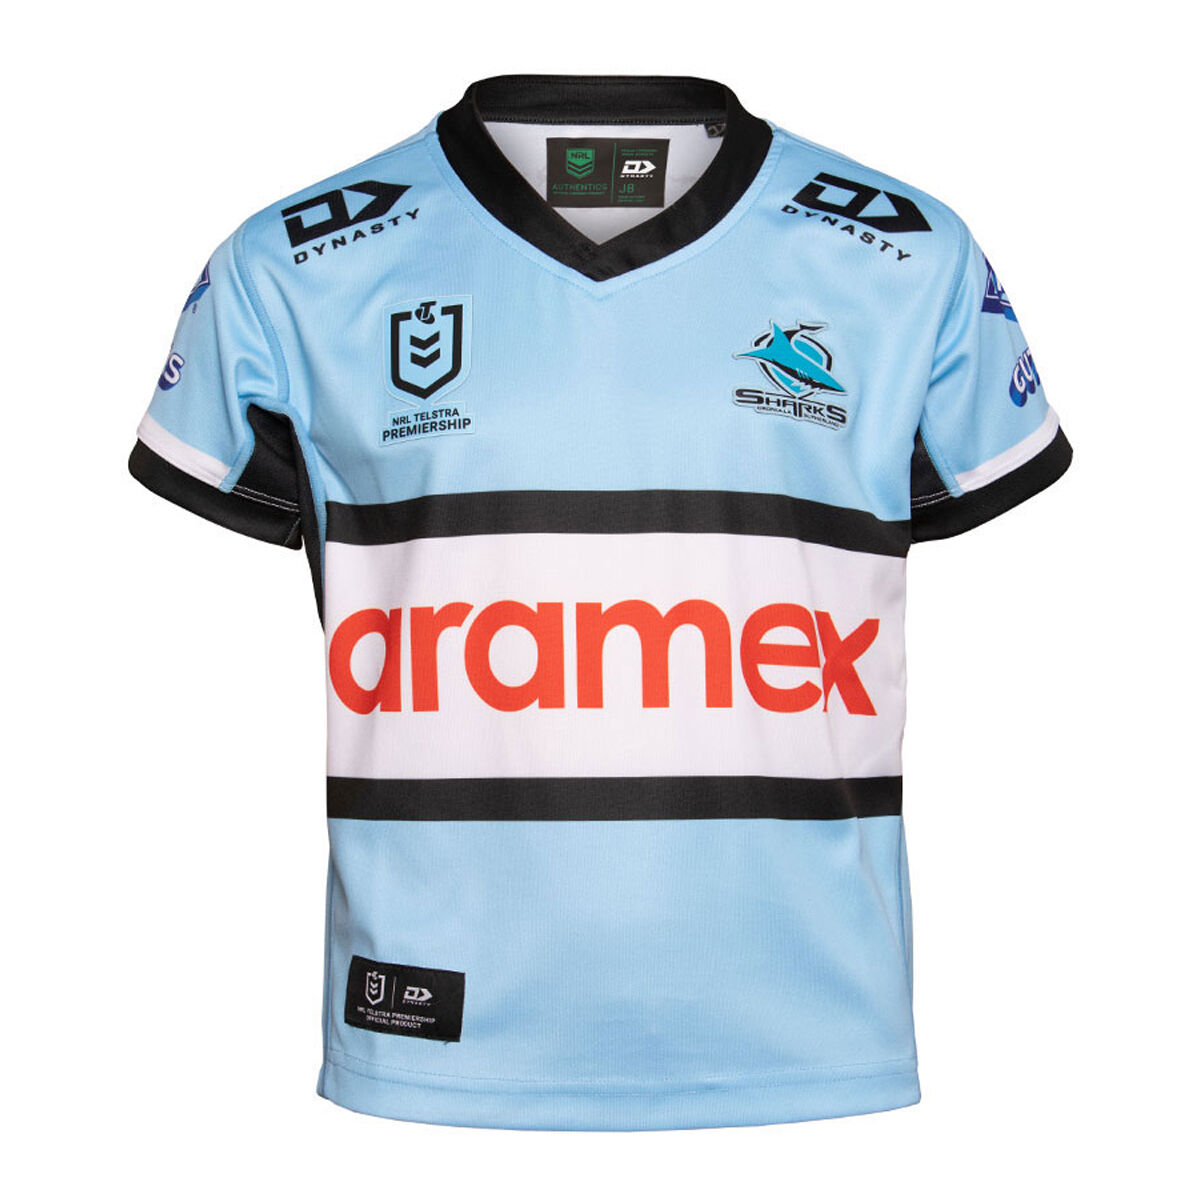 Cronulla Sharks rugby league jersey